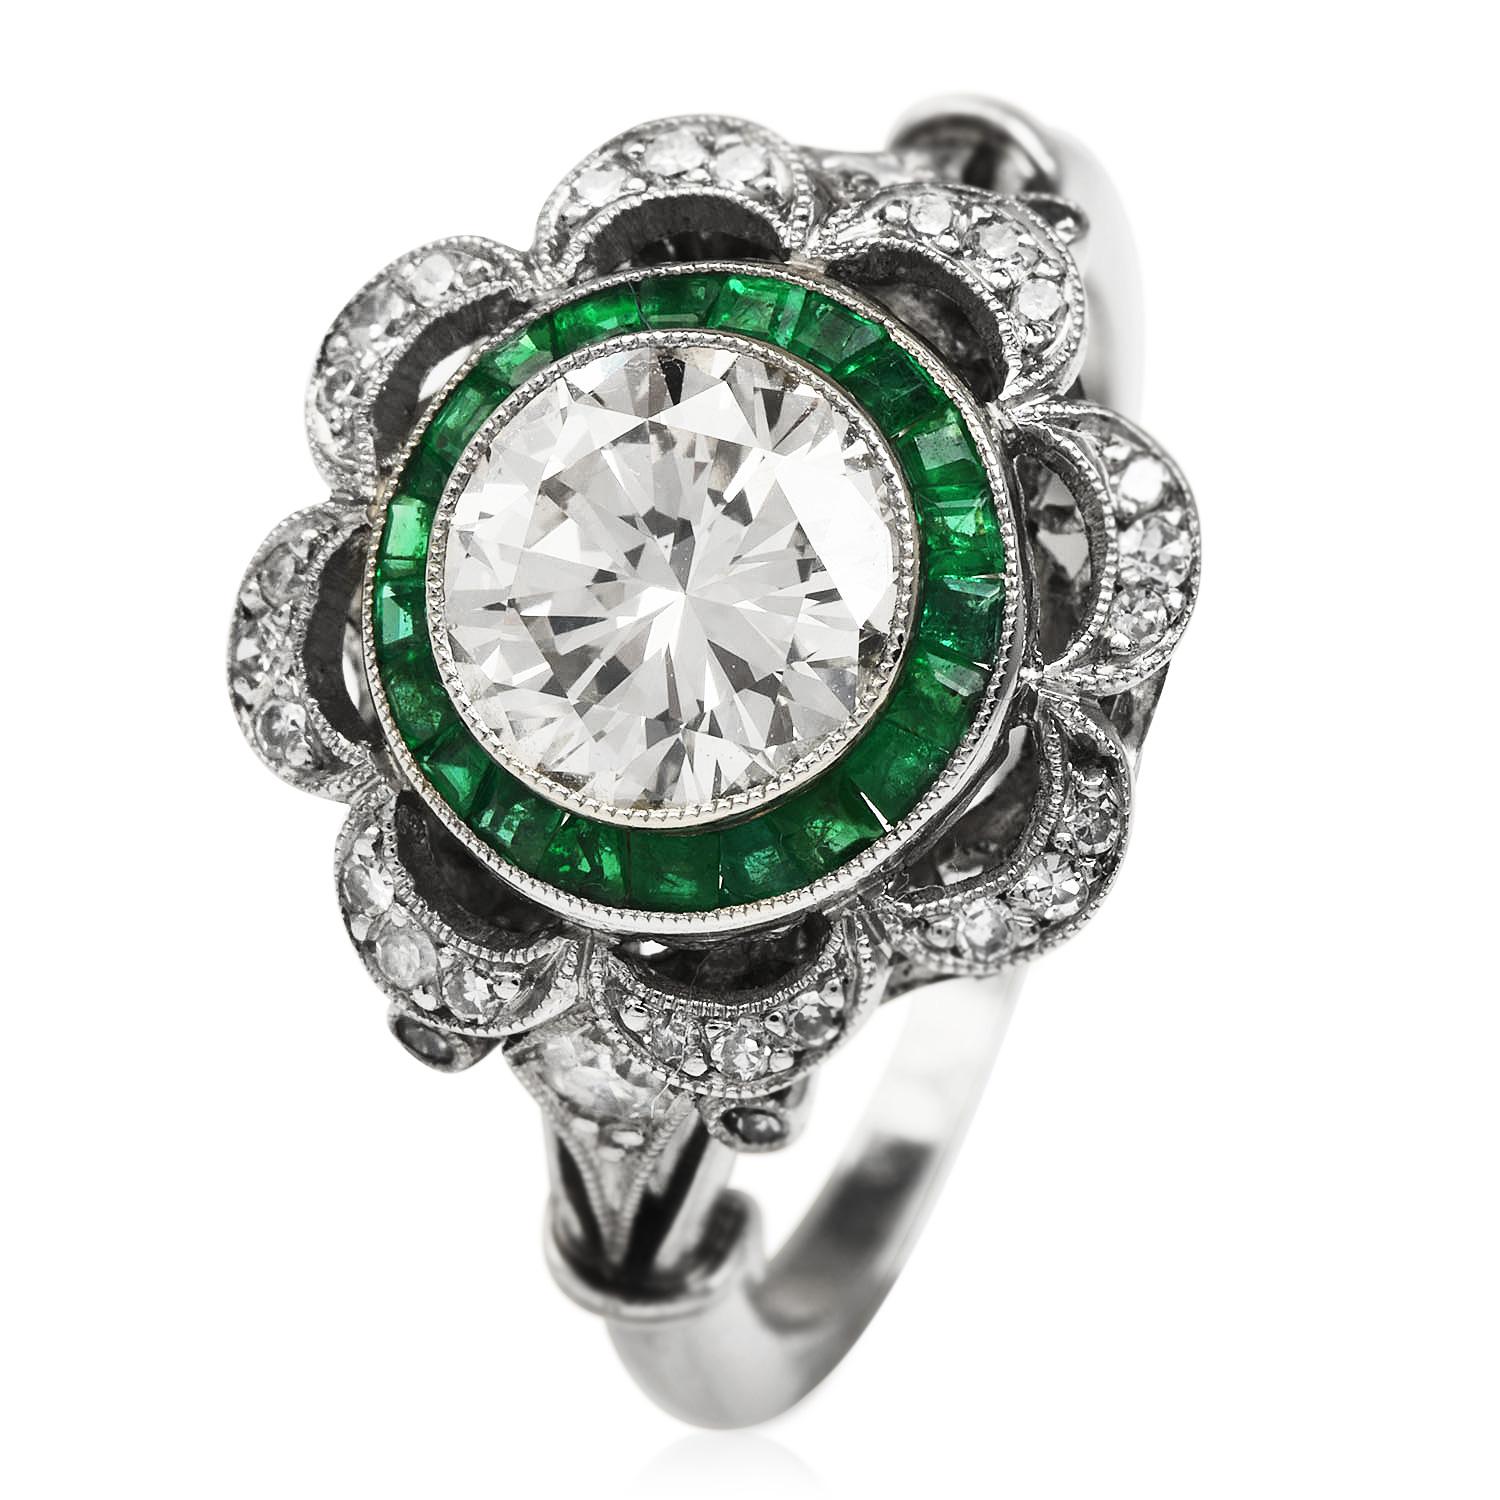 This  Art Deco design estate platinum Diamonds and Emerald ring is centered with a round-cut diamond weighing approx. 1.52 carats, M-N color, VS1 Clarity. It is surrounded by 30 French-cut Genuine Emeralds cumulatively weighing approx. 0.50 carats